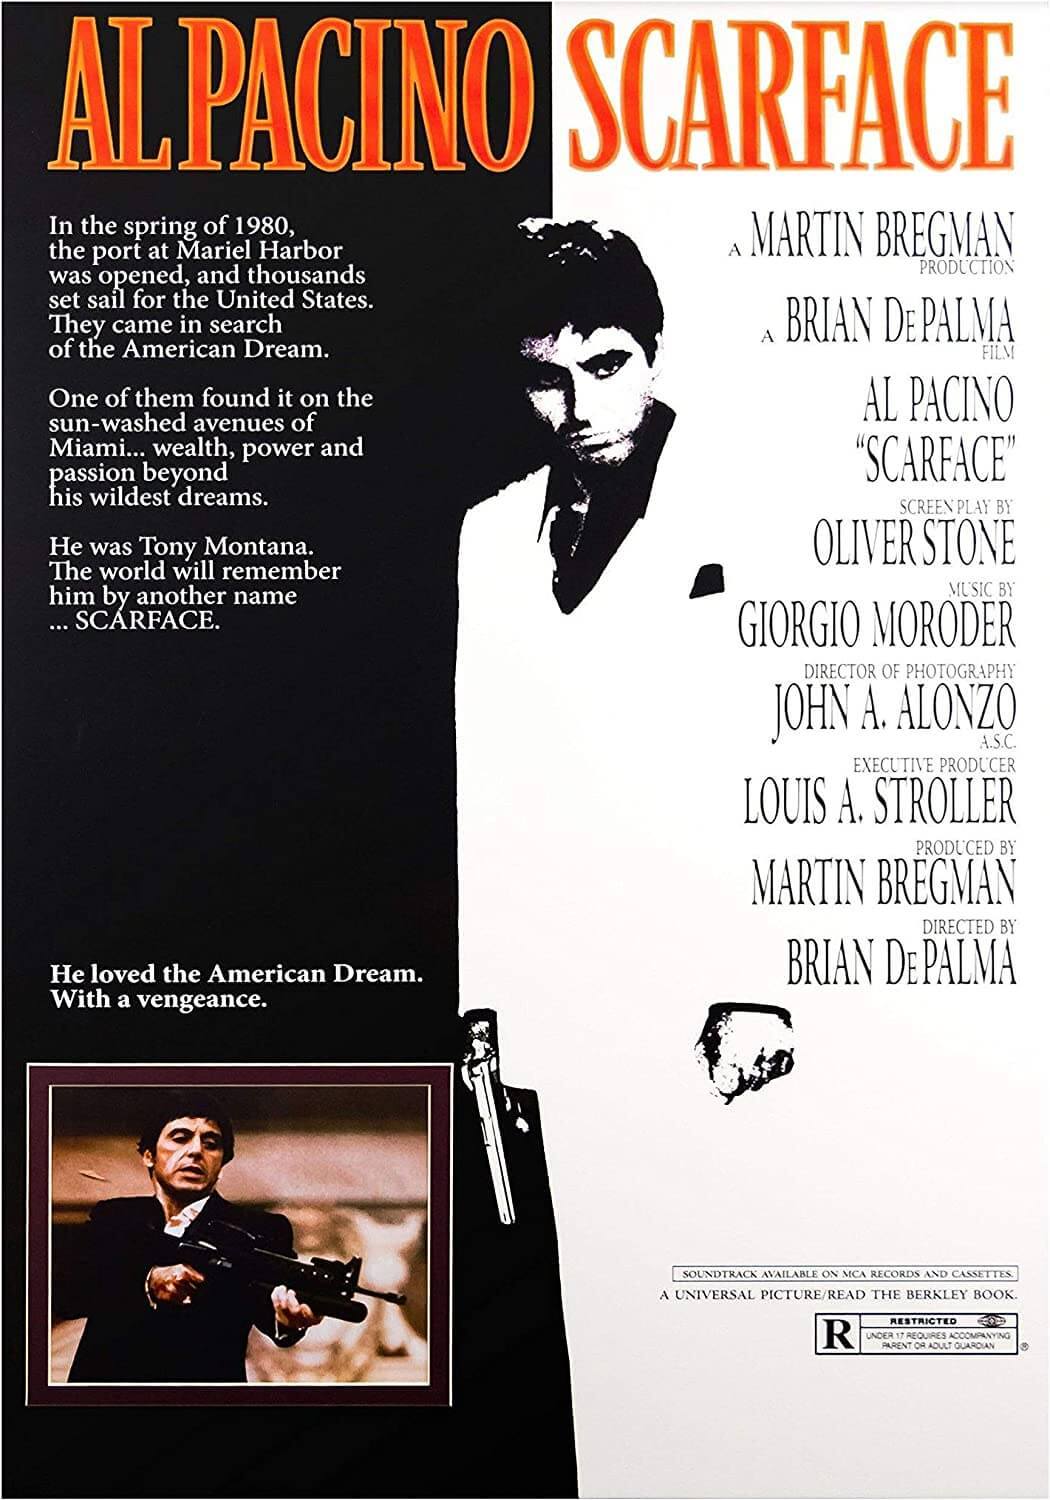 <p>Scarface (1983) - Al Pacino 80s poster. “He loved the American Dream. With a vengeance”.</p>